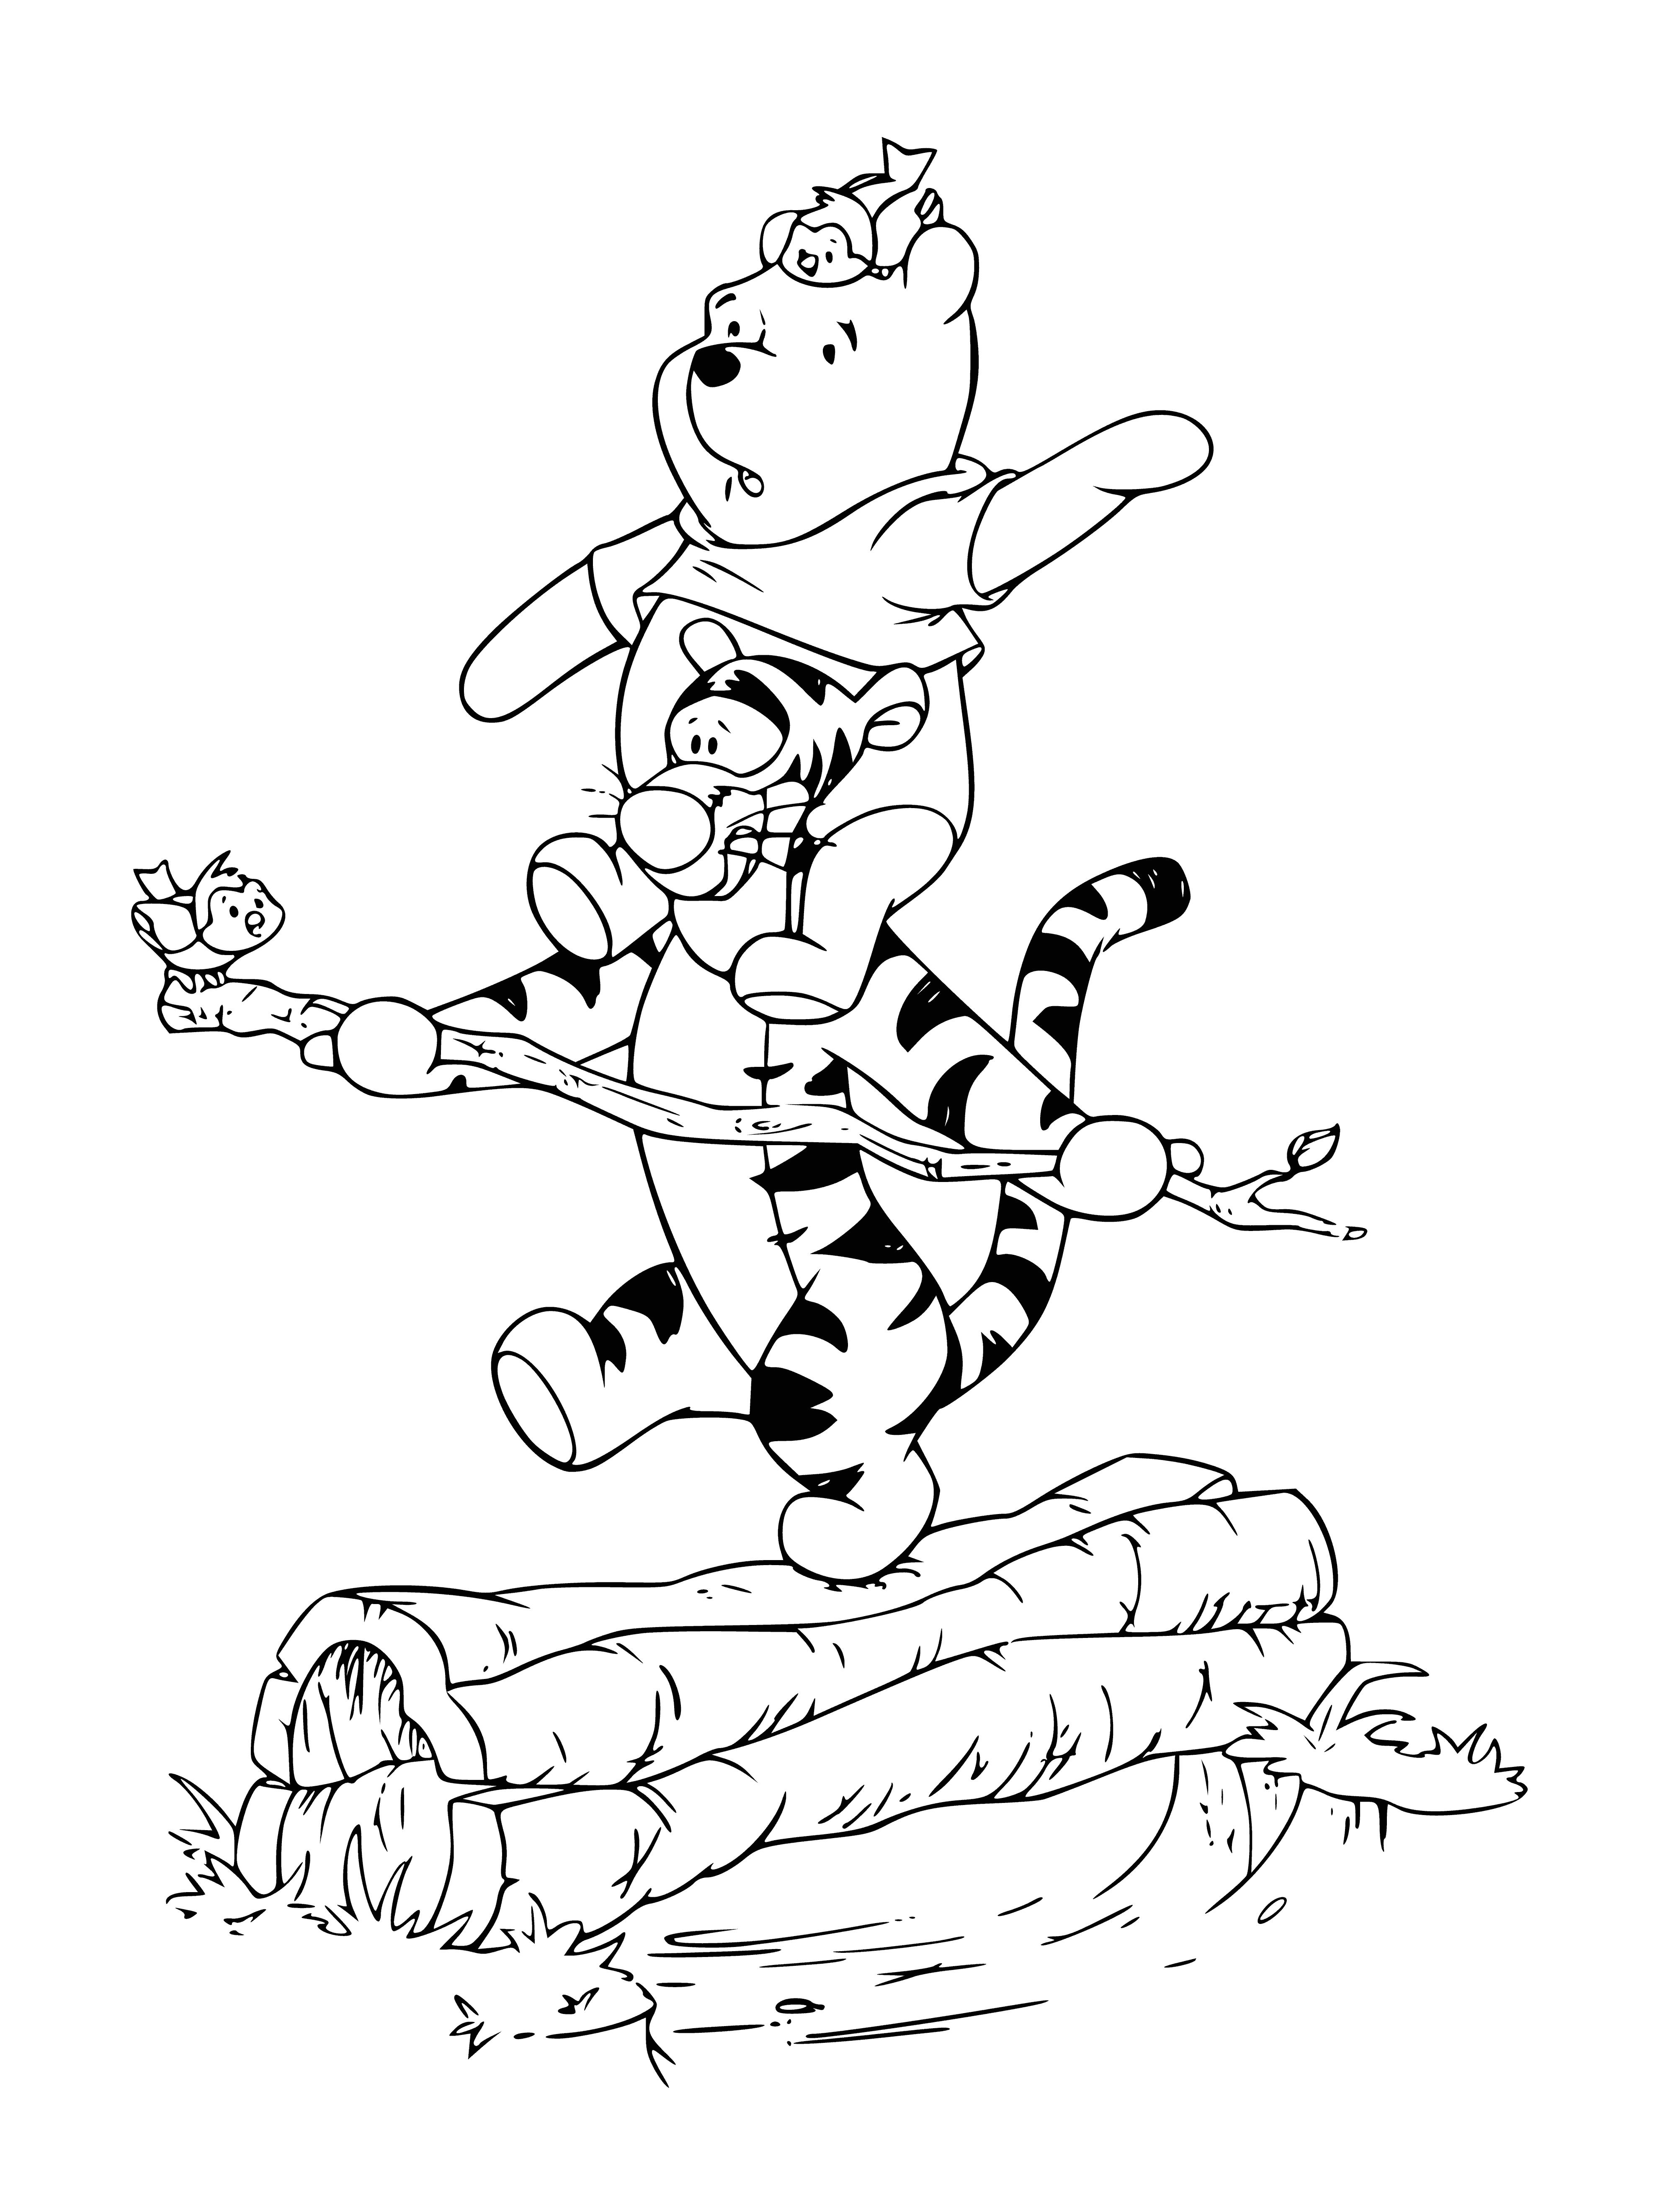 coloring page: Winnie the Pooh and Tigger stand side-by-side, arms outstretched, Pooh looking up, Tigger smiling. A tree stands behind, with green leaves and yellow/red leaves on the ground.